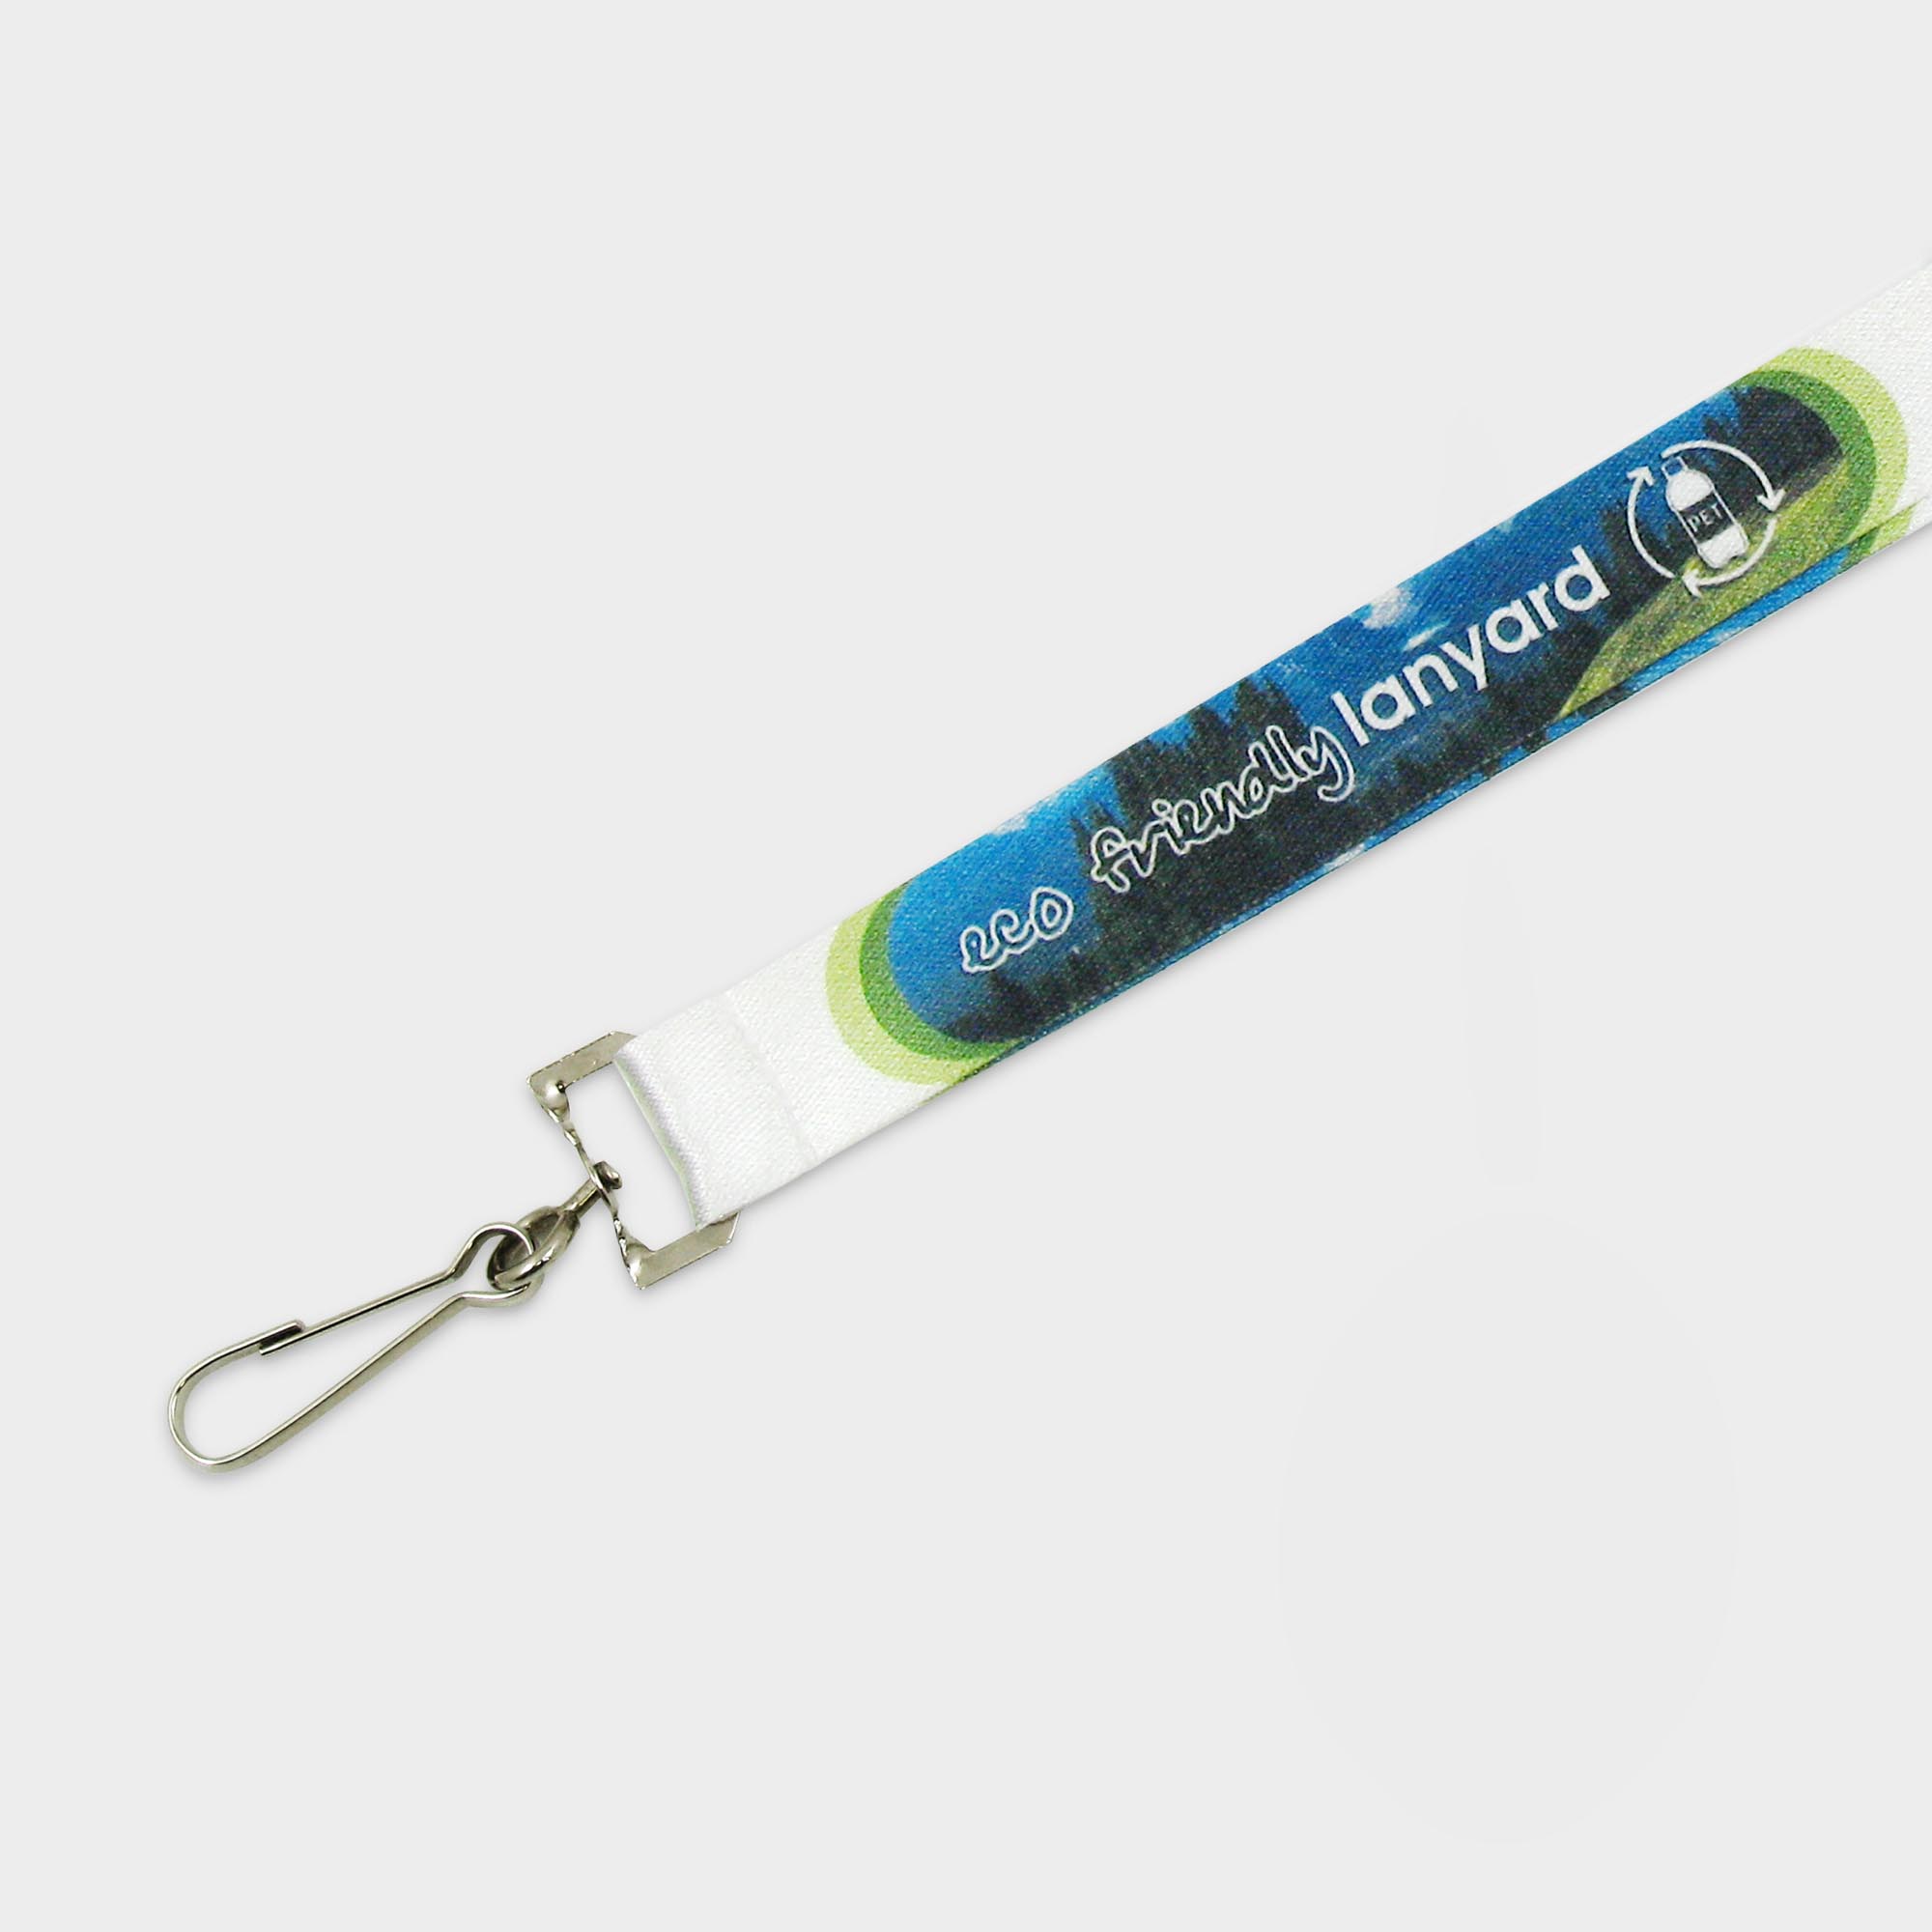 The Green & Good 20mm Dye-Sub-Lanyard is made from recycled bottles (PET). A great eco-friendly alternative to a standard lanyard. Dye sublimation allows for the whole lanyard to be printed in full colour. Standard Dog-Clip. Other clip options, short release and safety breaks are available. Please contact us for more information.